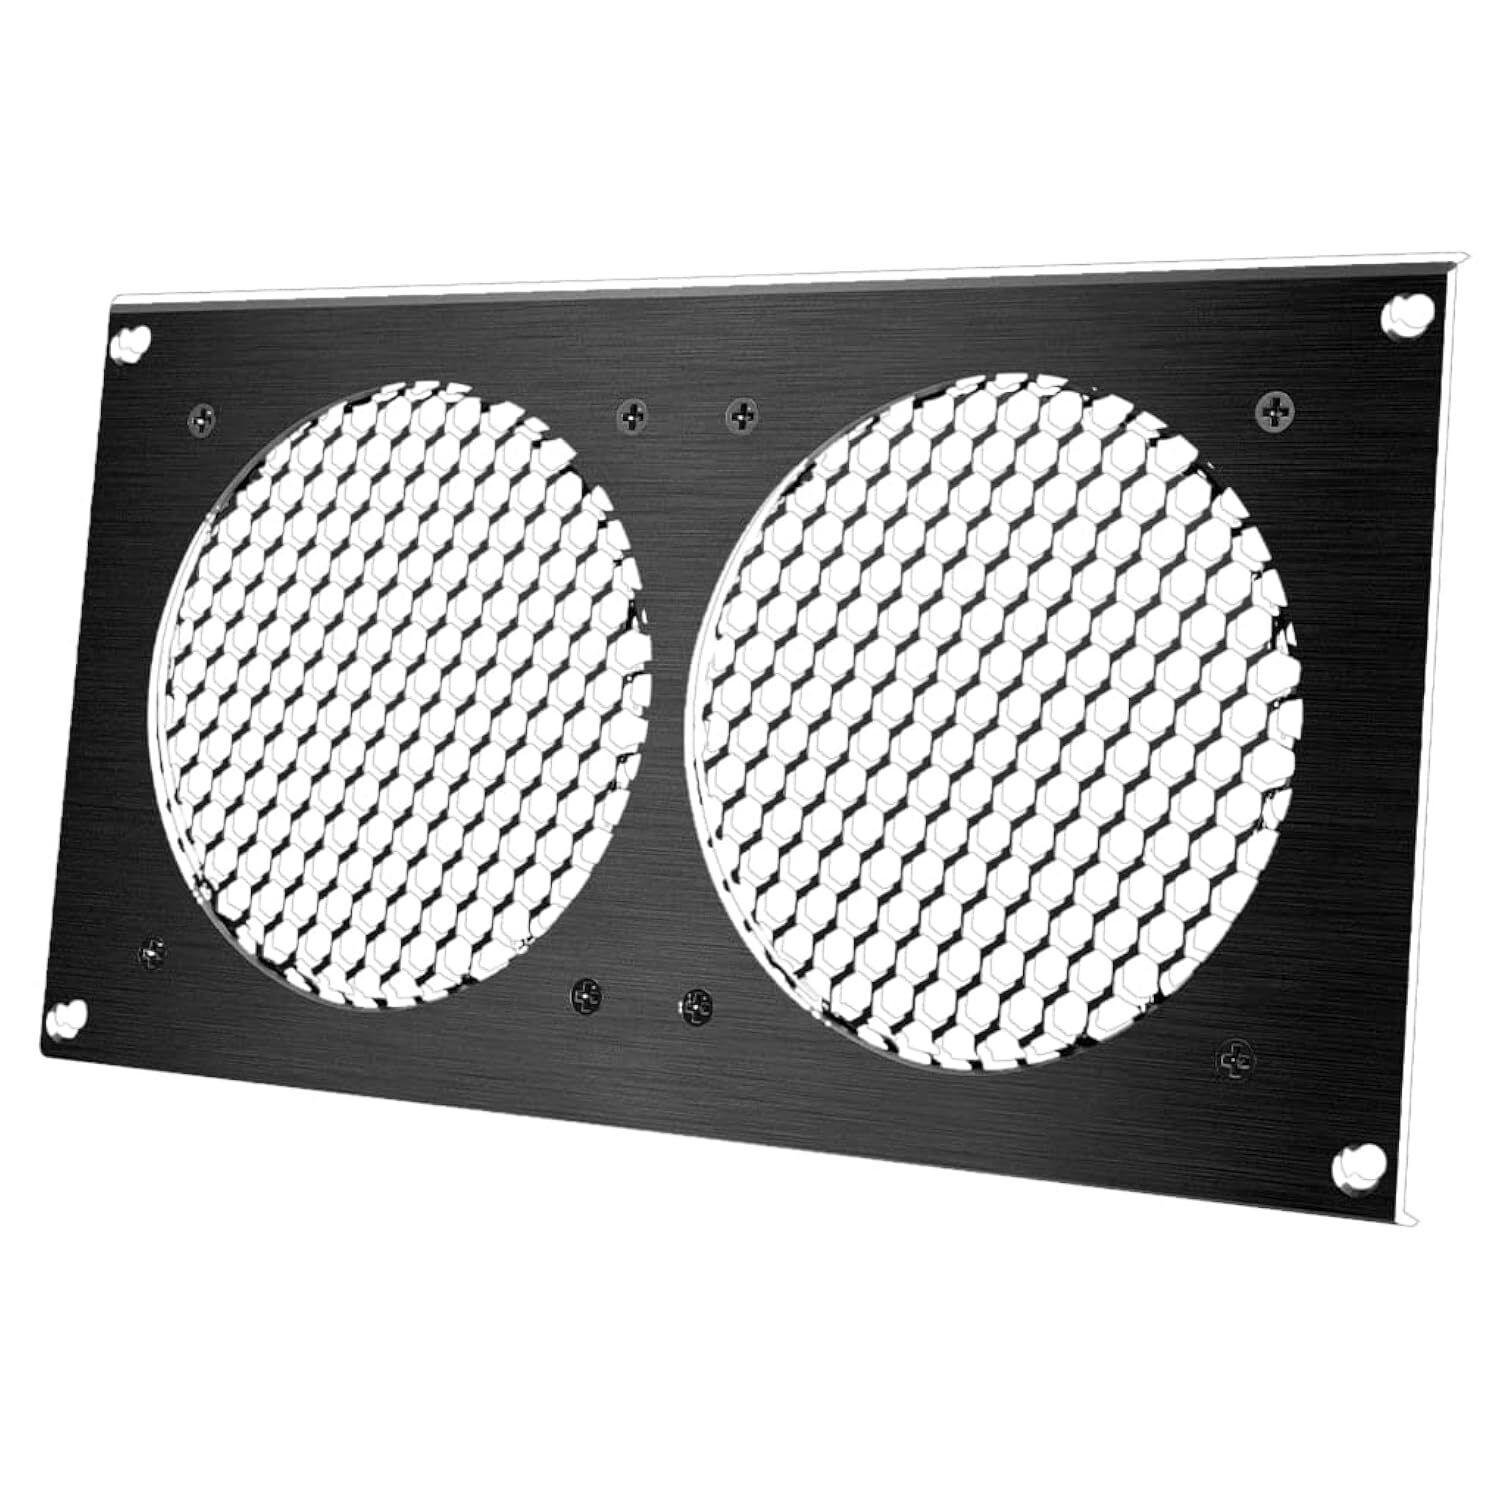 AC Infinity Ventilation Grille, for PC Computer AV Electronic Cabinets, Also m